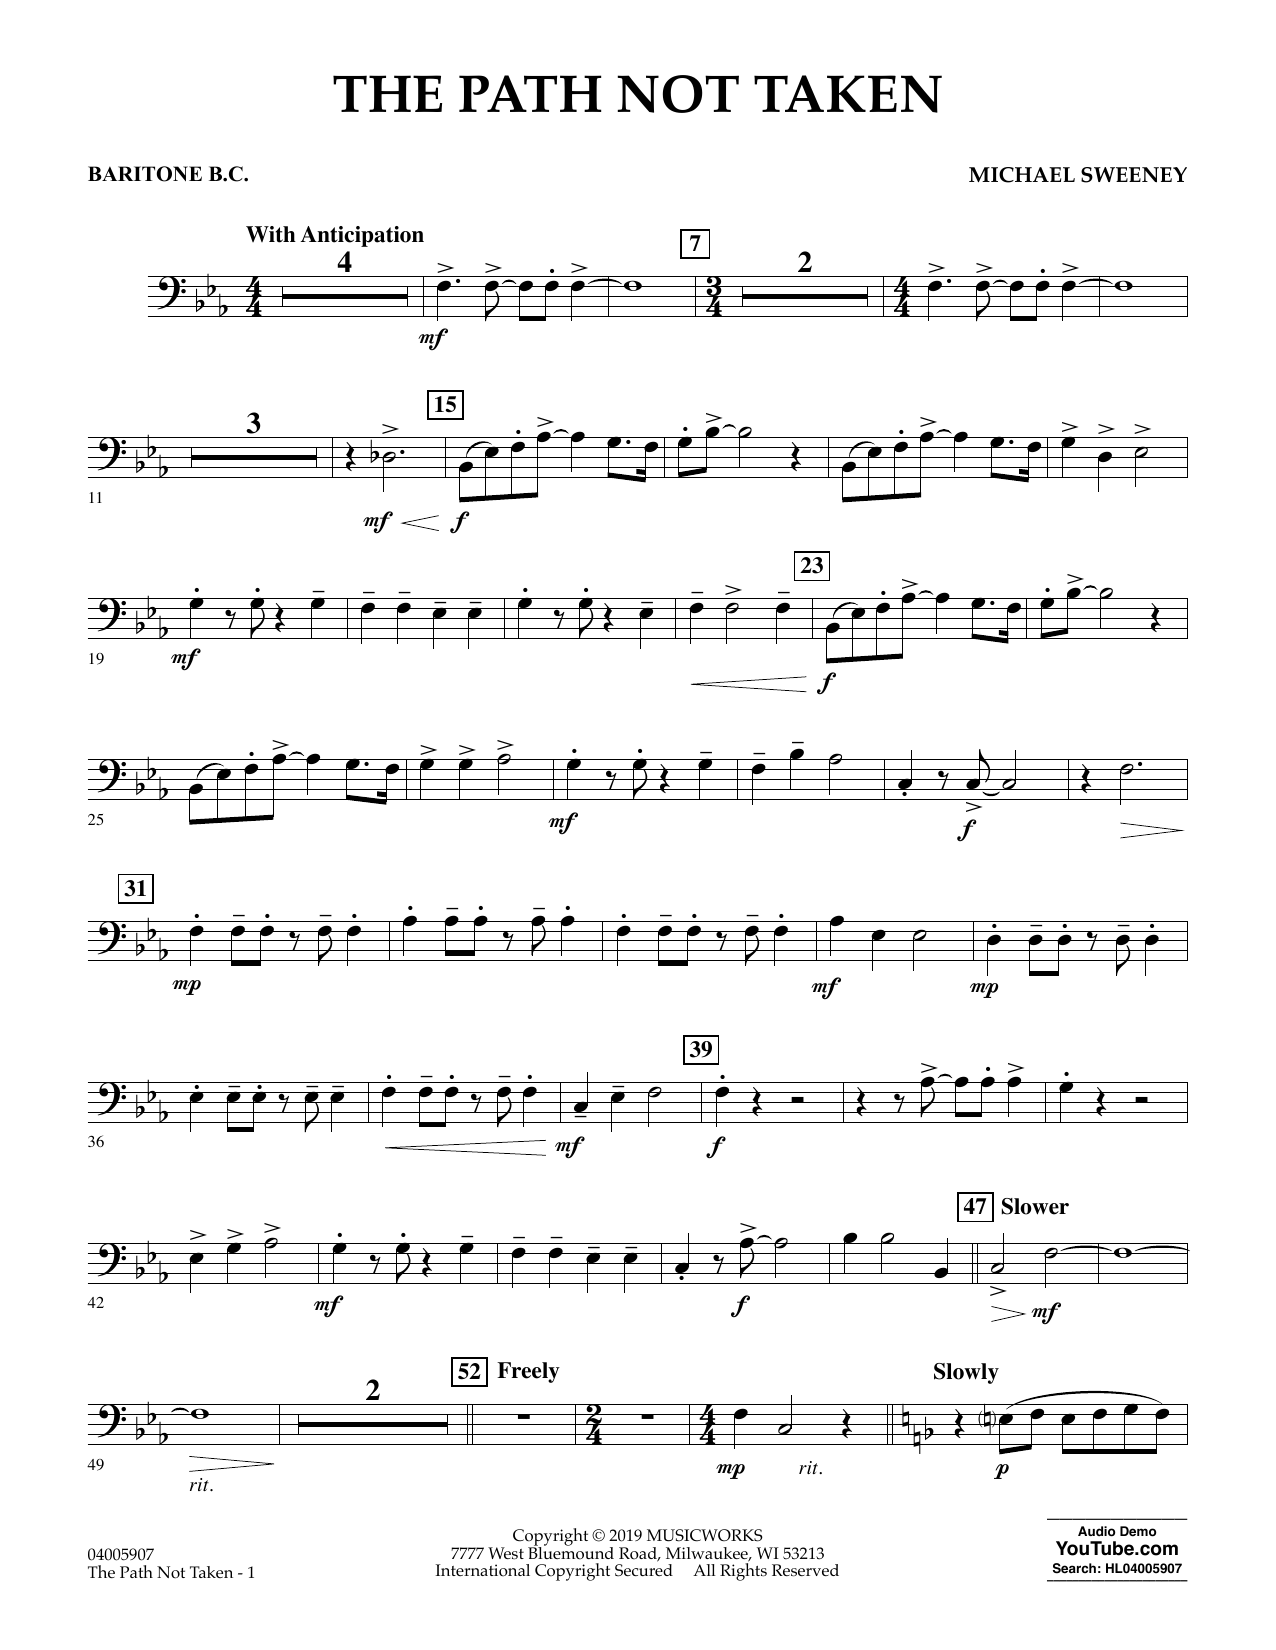 Michael Sweeney The Path Not Taken - Baritone B.C. sheet music preview music notes and score for Concert Band including 2 page(s)